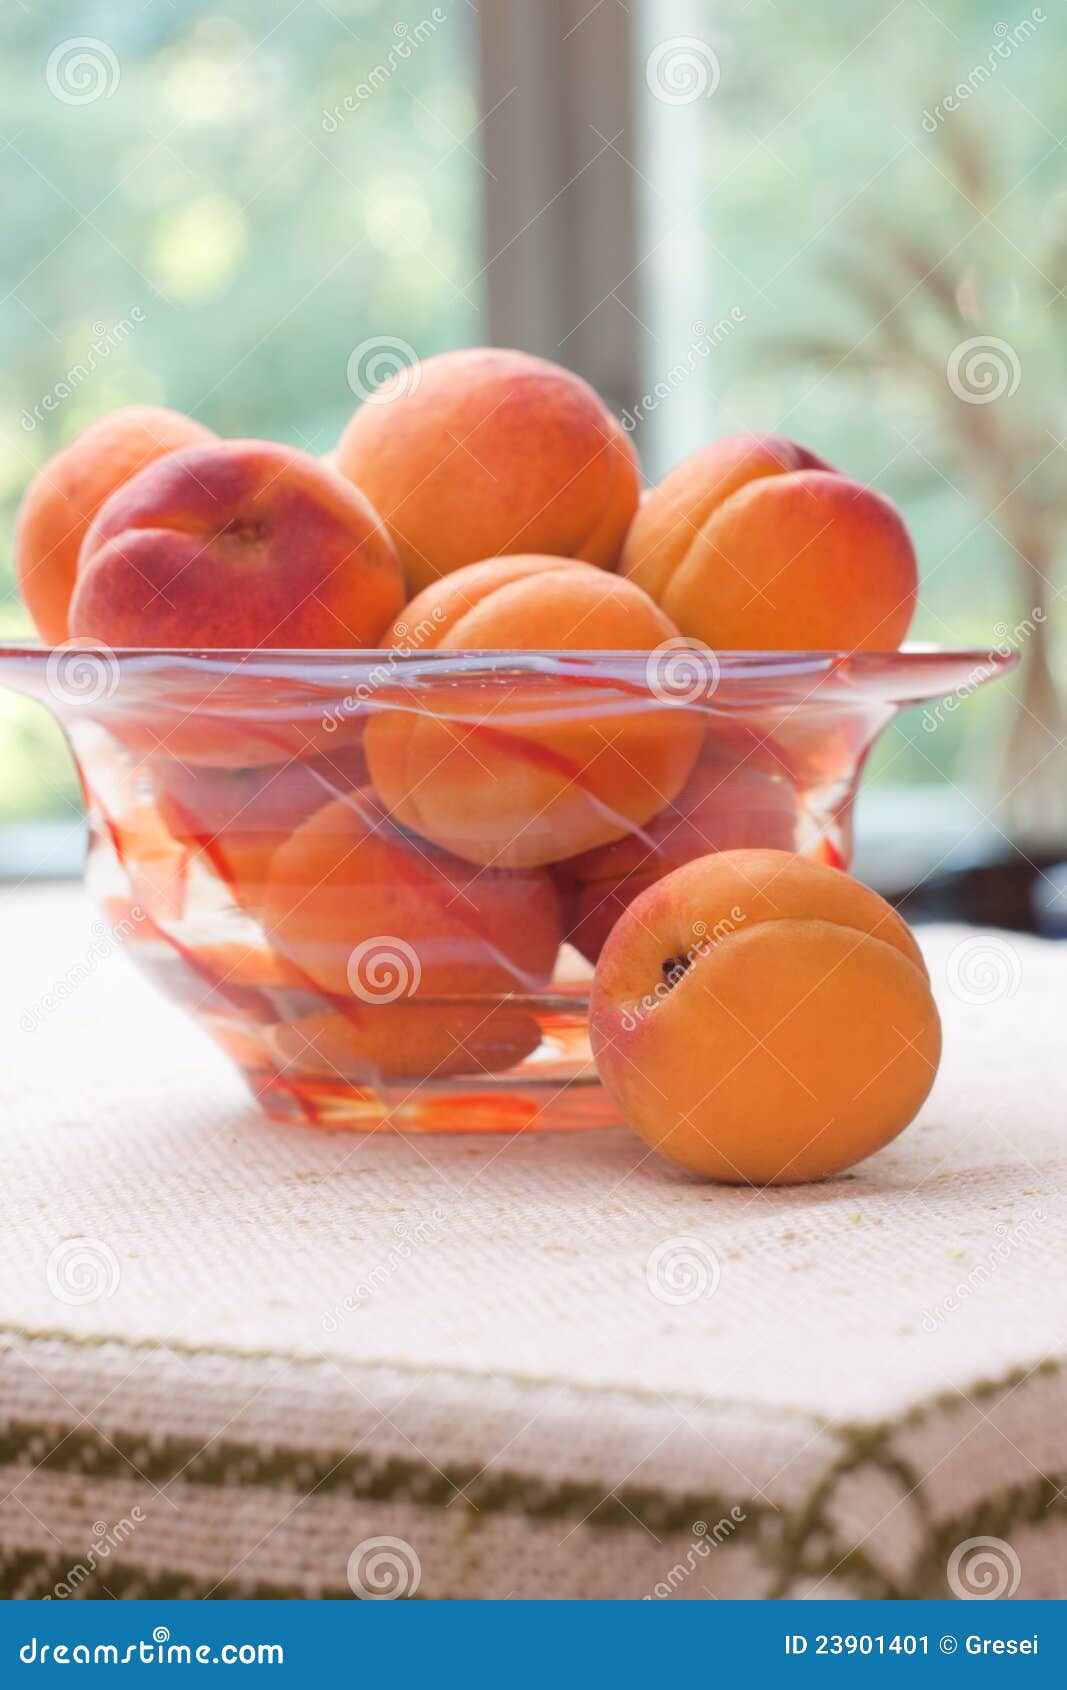 Apricots stock image. Image of juicy, sweet, eating, food - 23901401